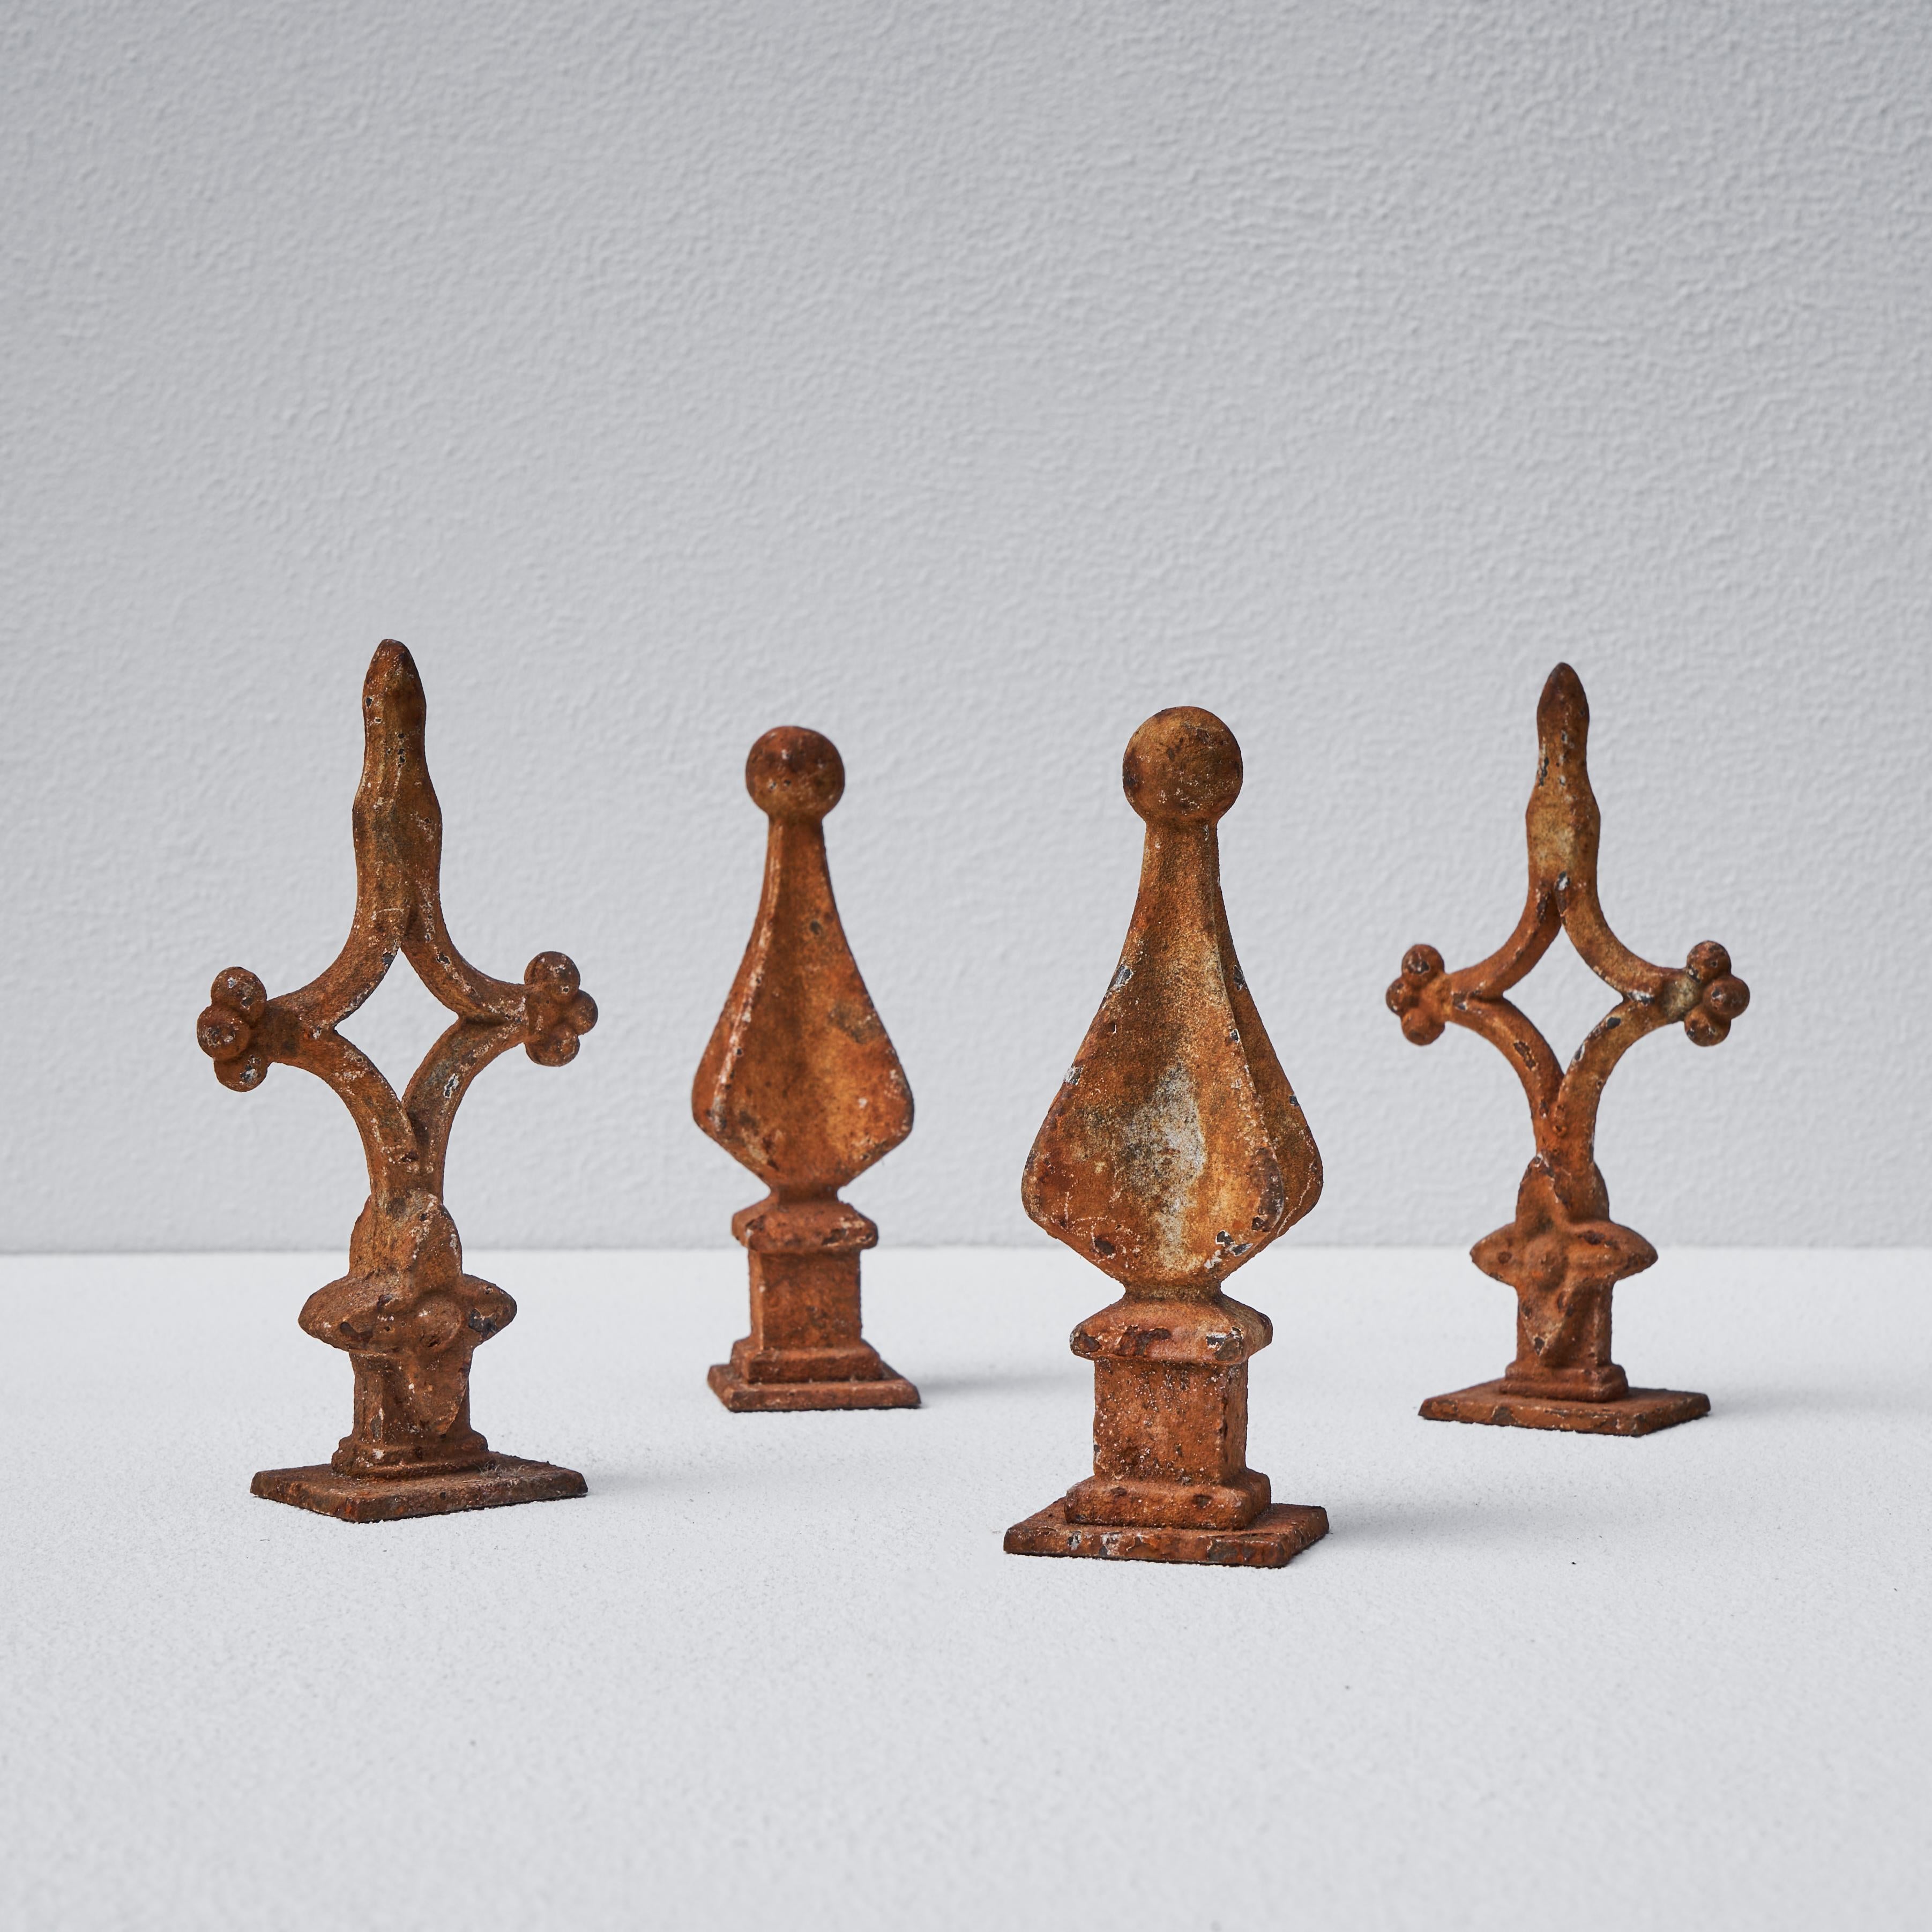 Set of 4 Rusted Decorative Finials. End of 19th century.

This is a wonderful antique set of rusted (fence) finials. Great as decoration on a desk, cabinet or table or usable as bookends.

Elegant and well proportioned quadrilateral shape with a